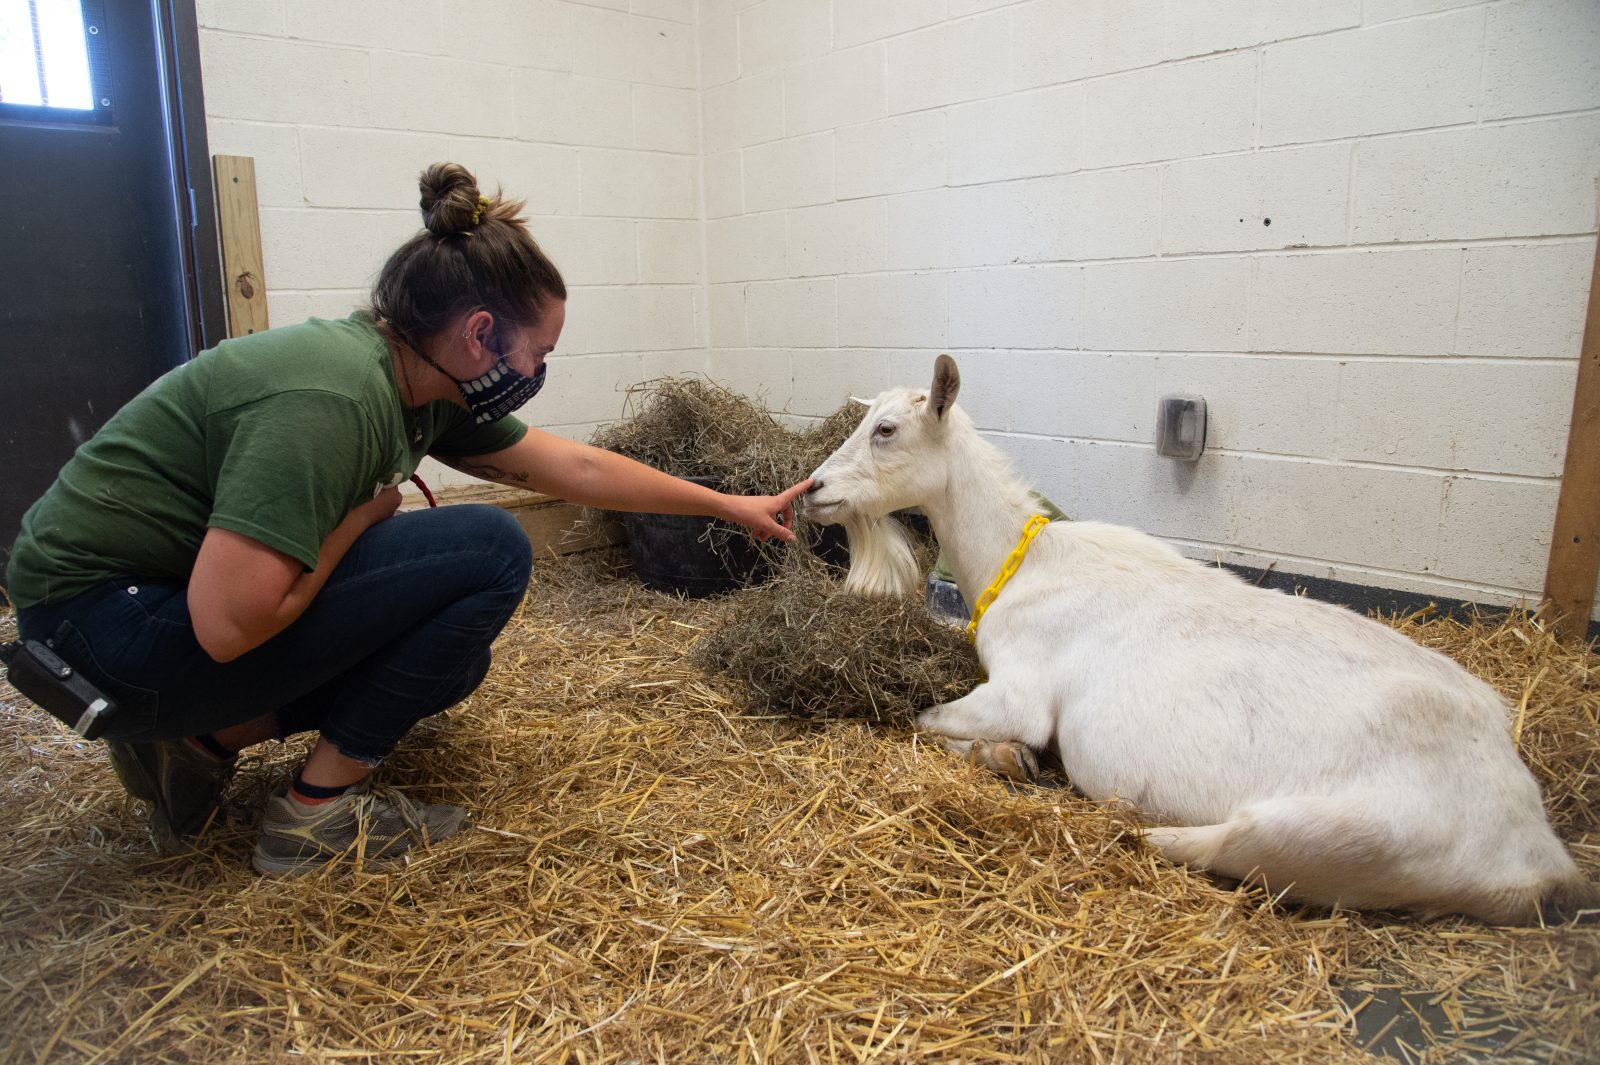 Erika Hultquist caregiver Shirley goat, shortly after her rescue